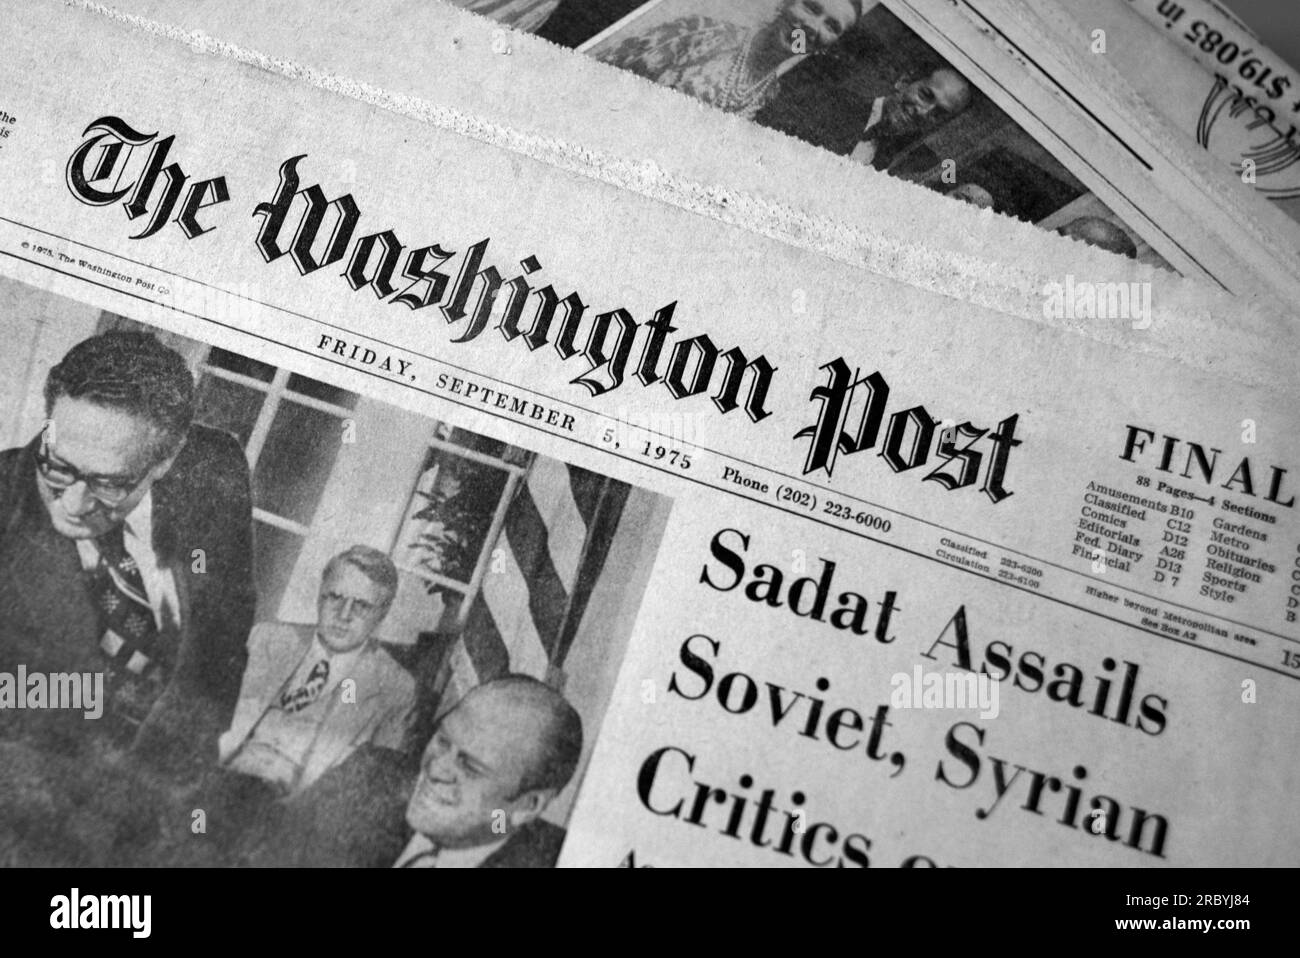 A copy of the September 5, 1975 edition of The Washington Post for sale in an American antique shop. Stock Photo